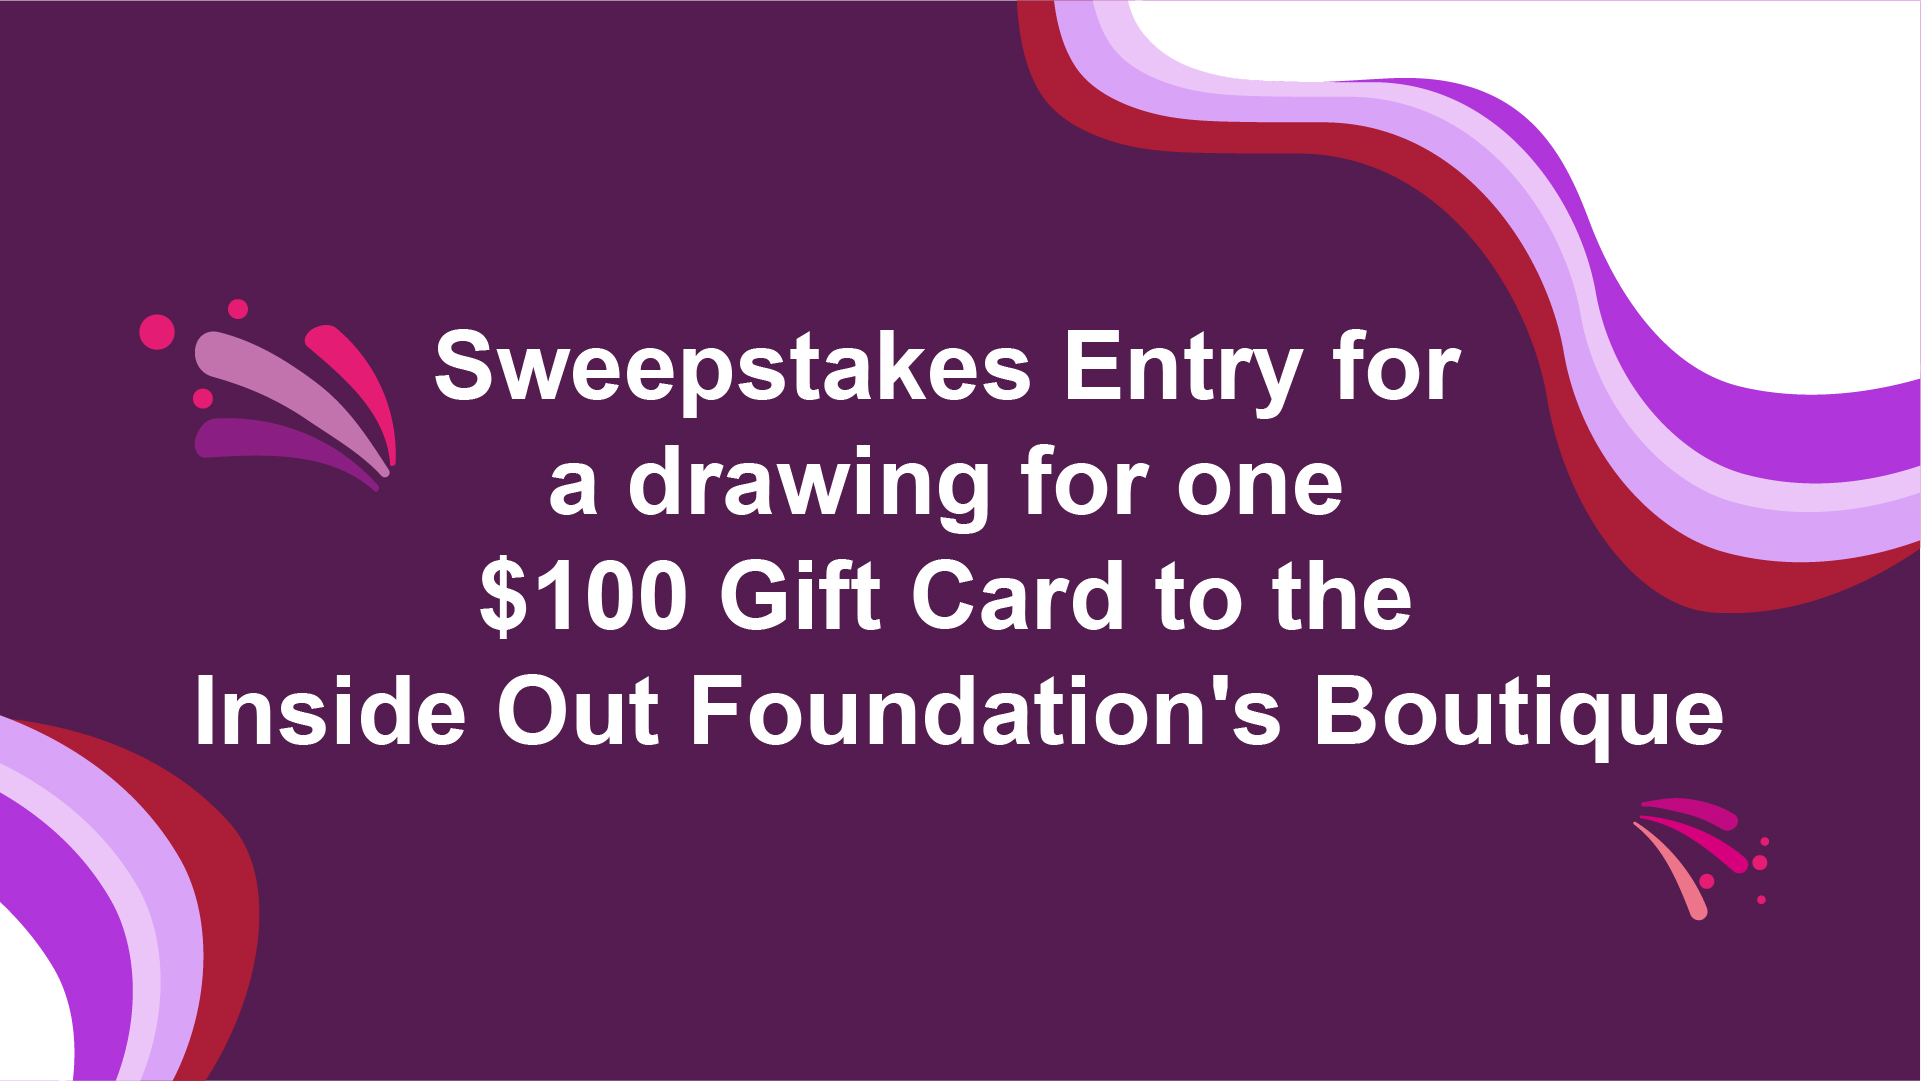 Enter to win a $100 gift card to The Inside Out Foundation boutique